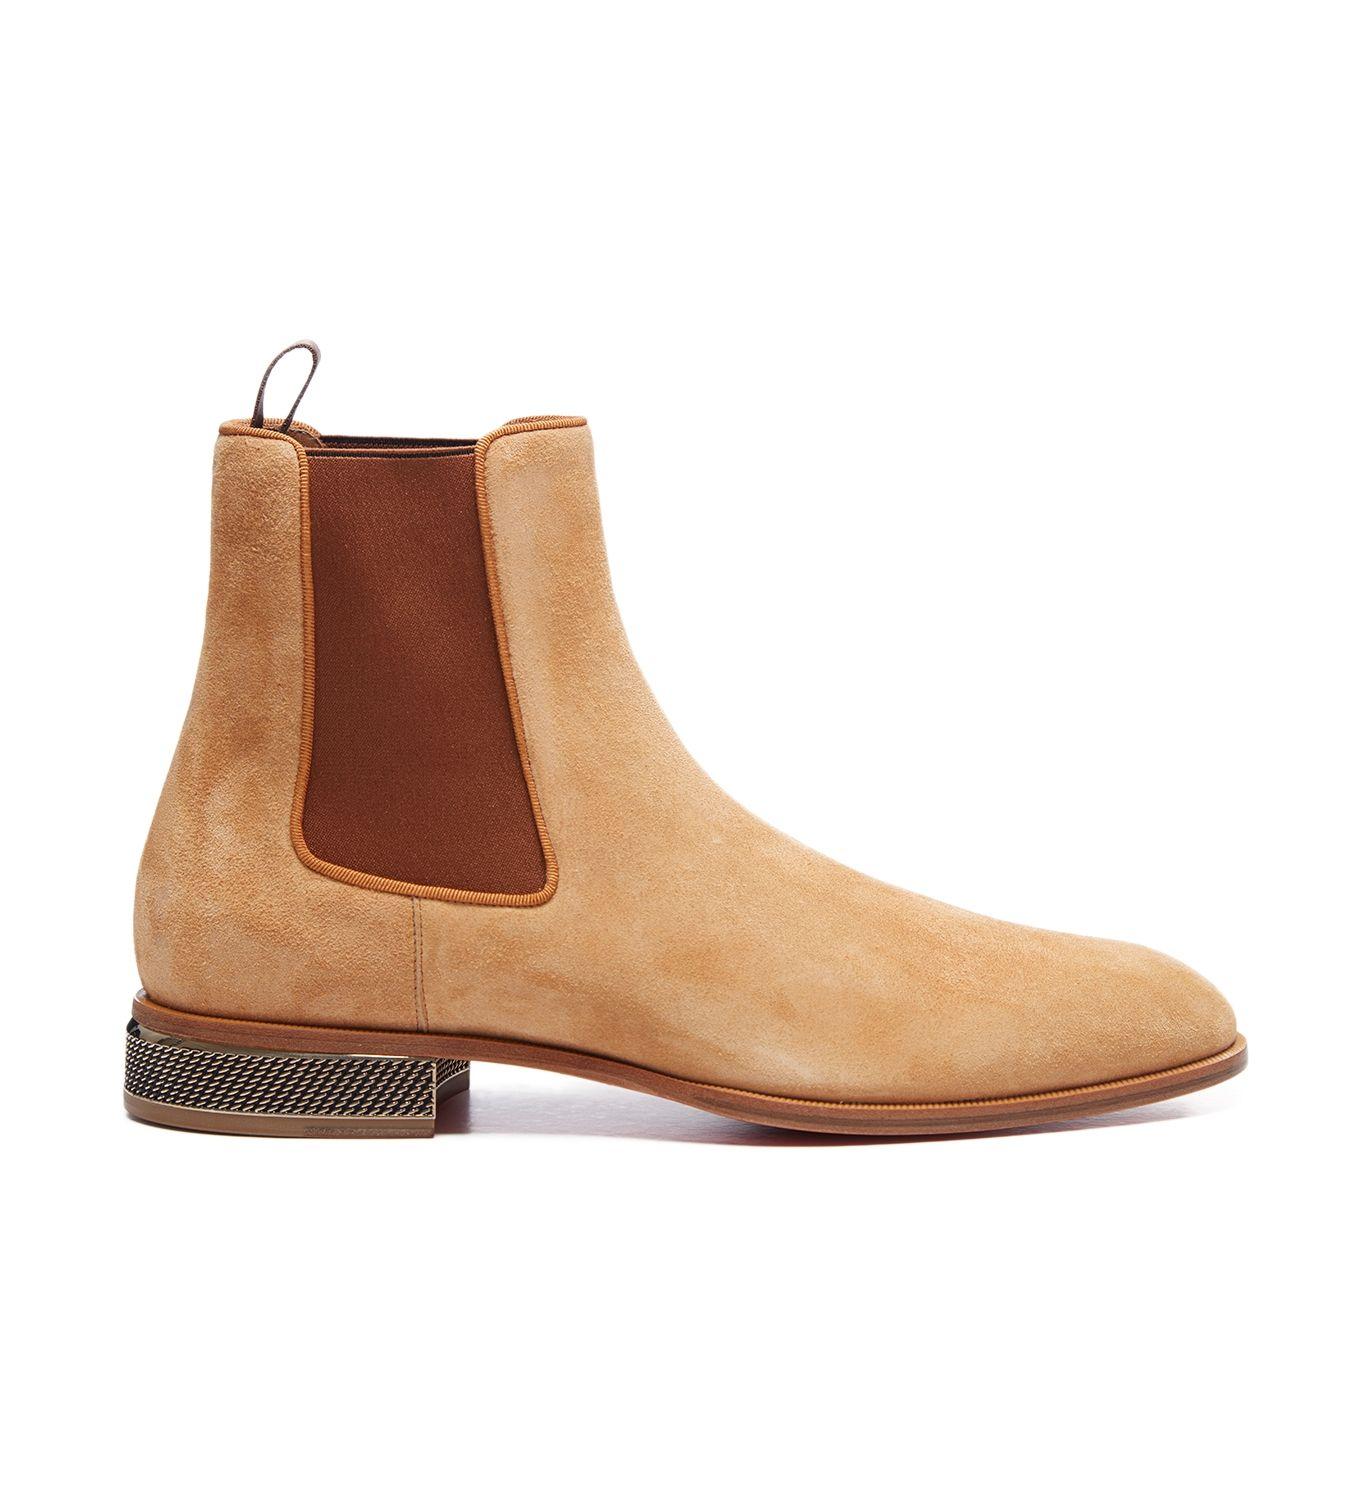 Christian Louboutin Samsocool Suede Chelsea Boots for